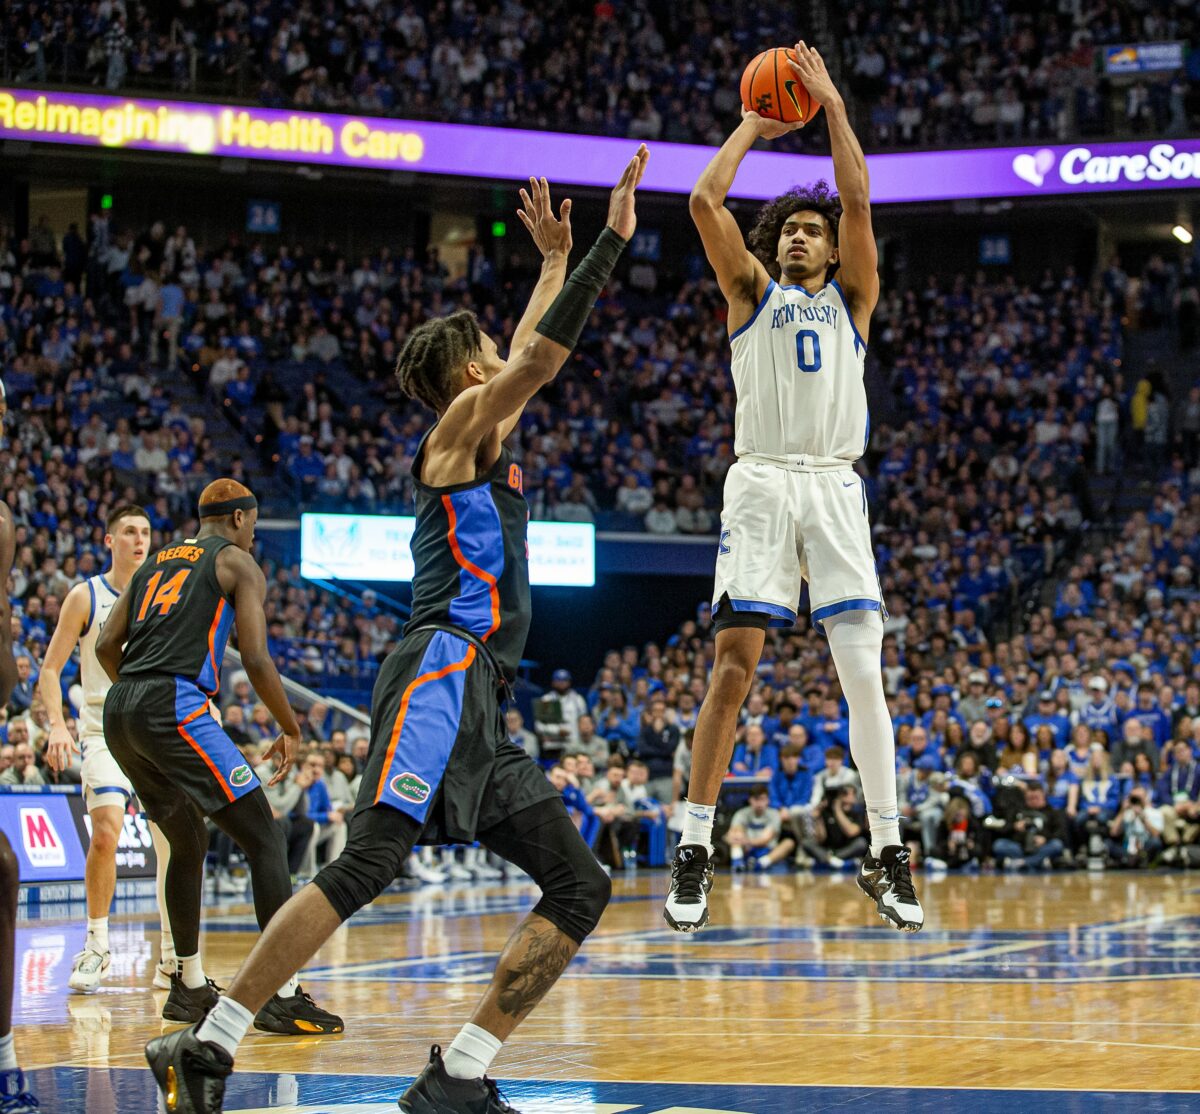 Kentucky vs. Florida live stream, TV channel, time, odds, how to watch college basketball